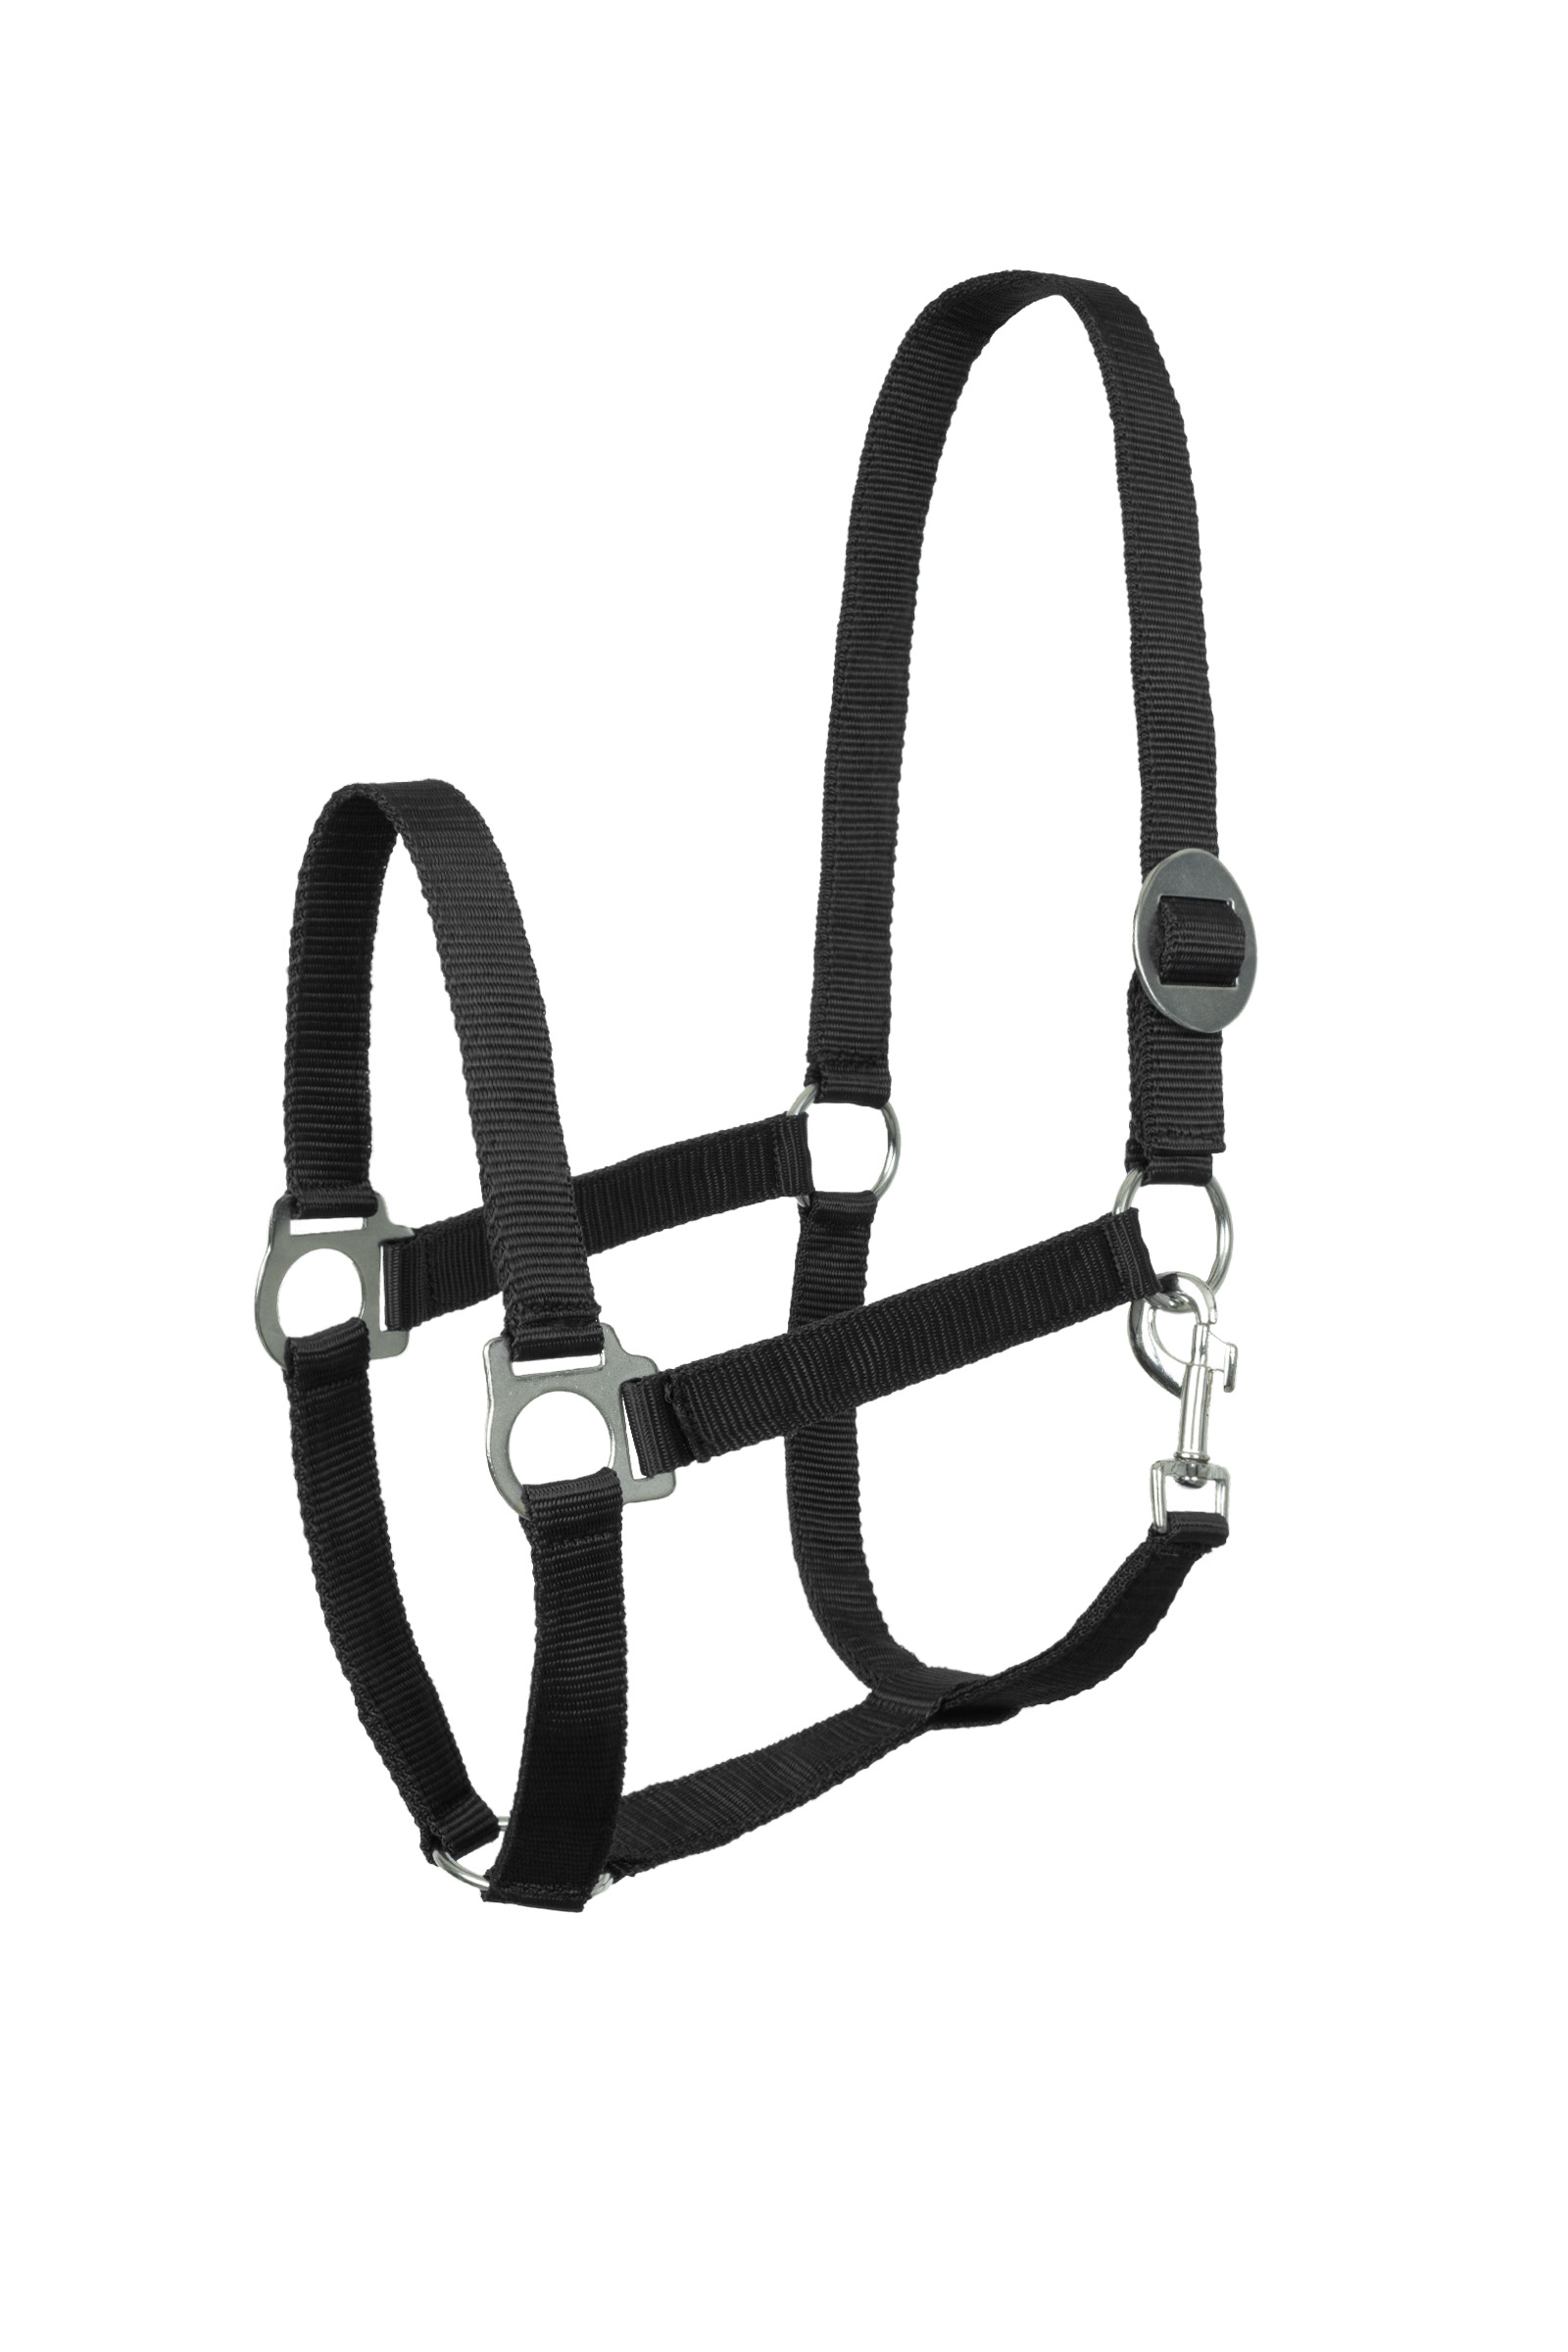 FinnTack American Quality Leather Halter with Adjustable Chin